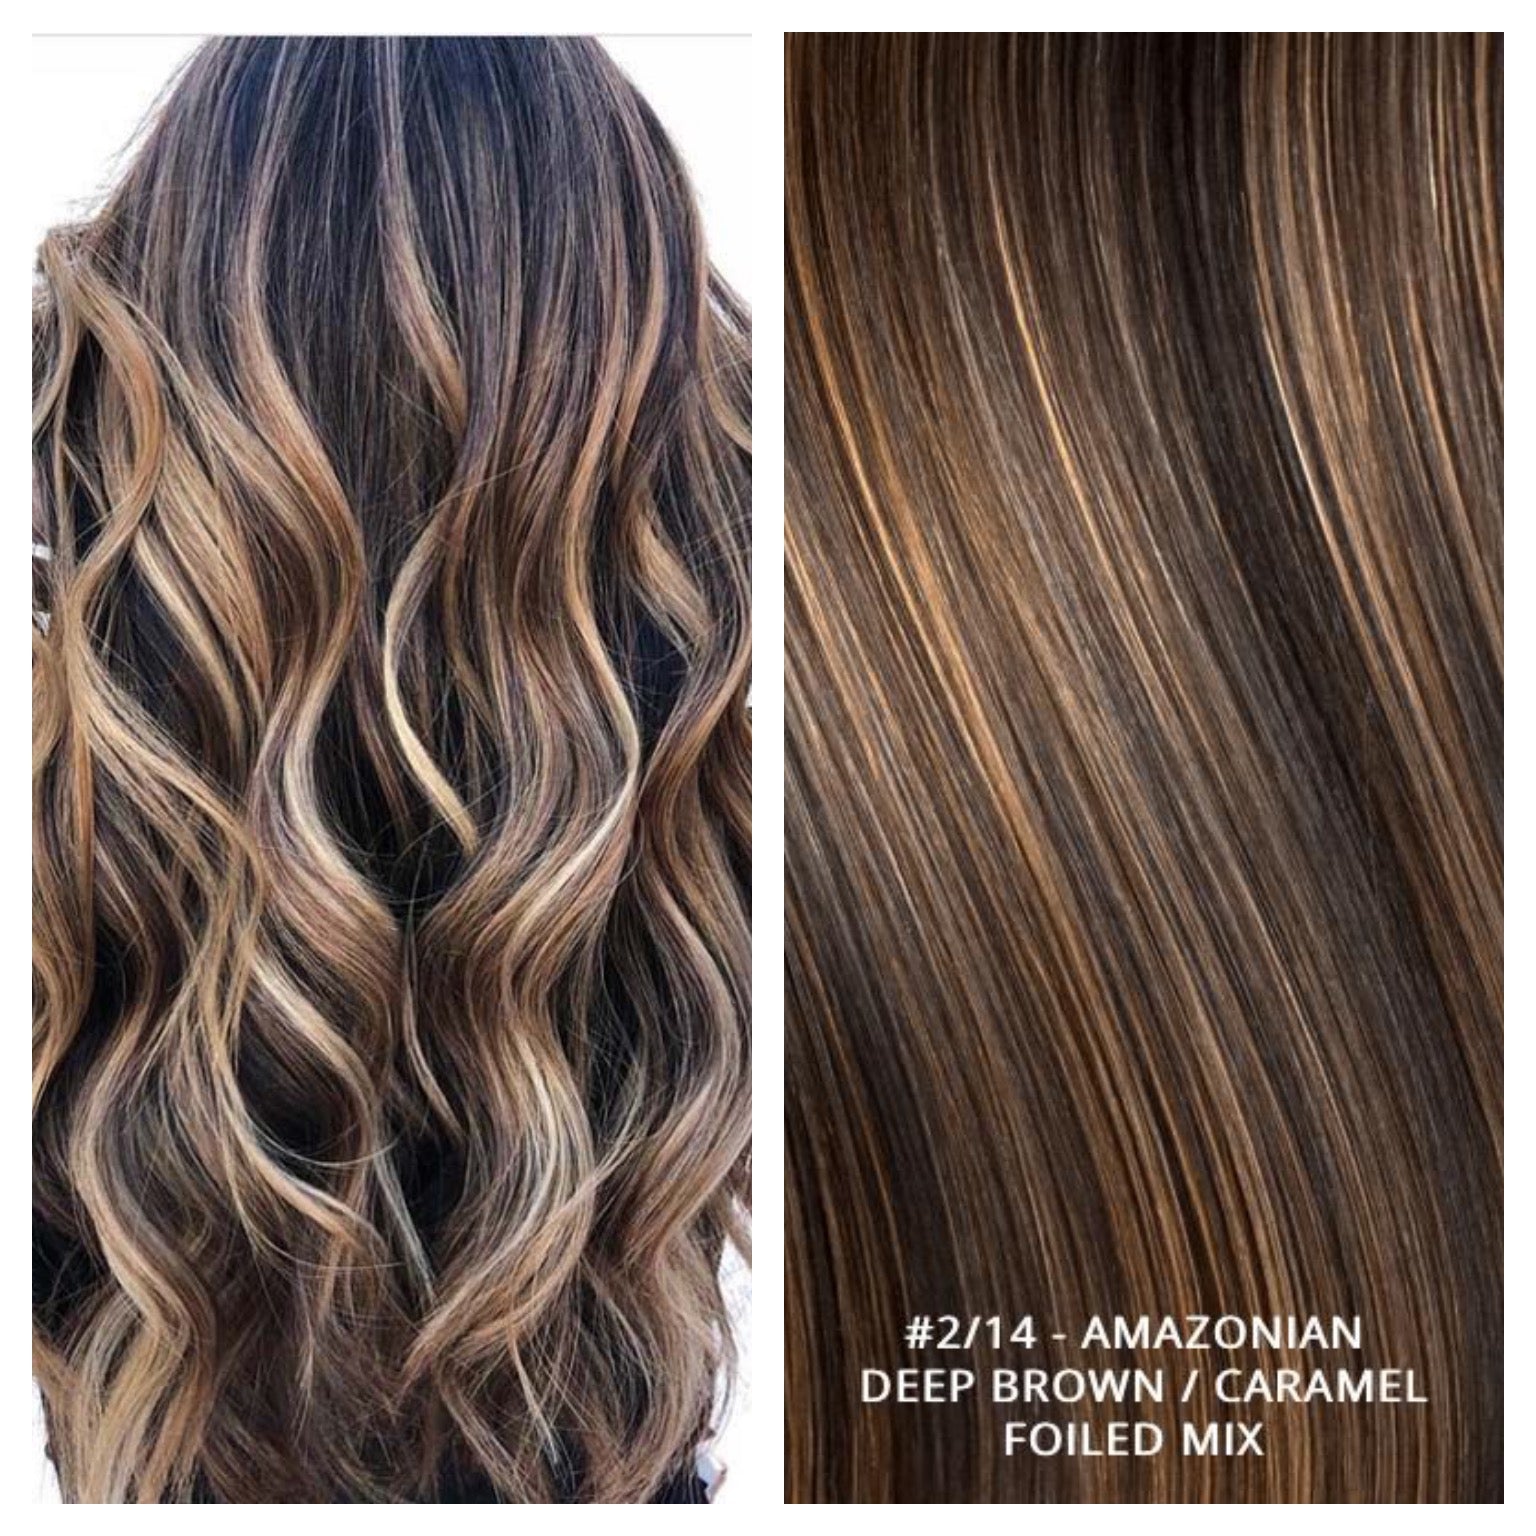 RUSSIAN TAPE HAIR EXTENSIONS HIGHLIGHTS #2/14 - AMAZONIAN - DEEP BROWN / CARAMEL FOILED MIX